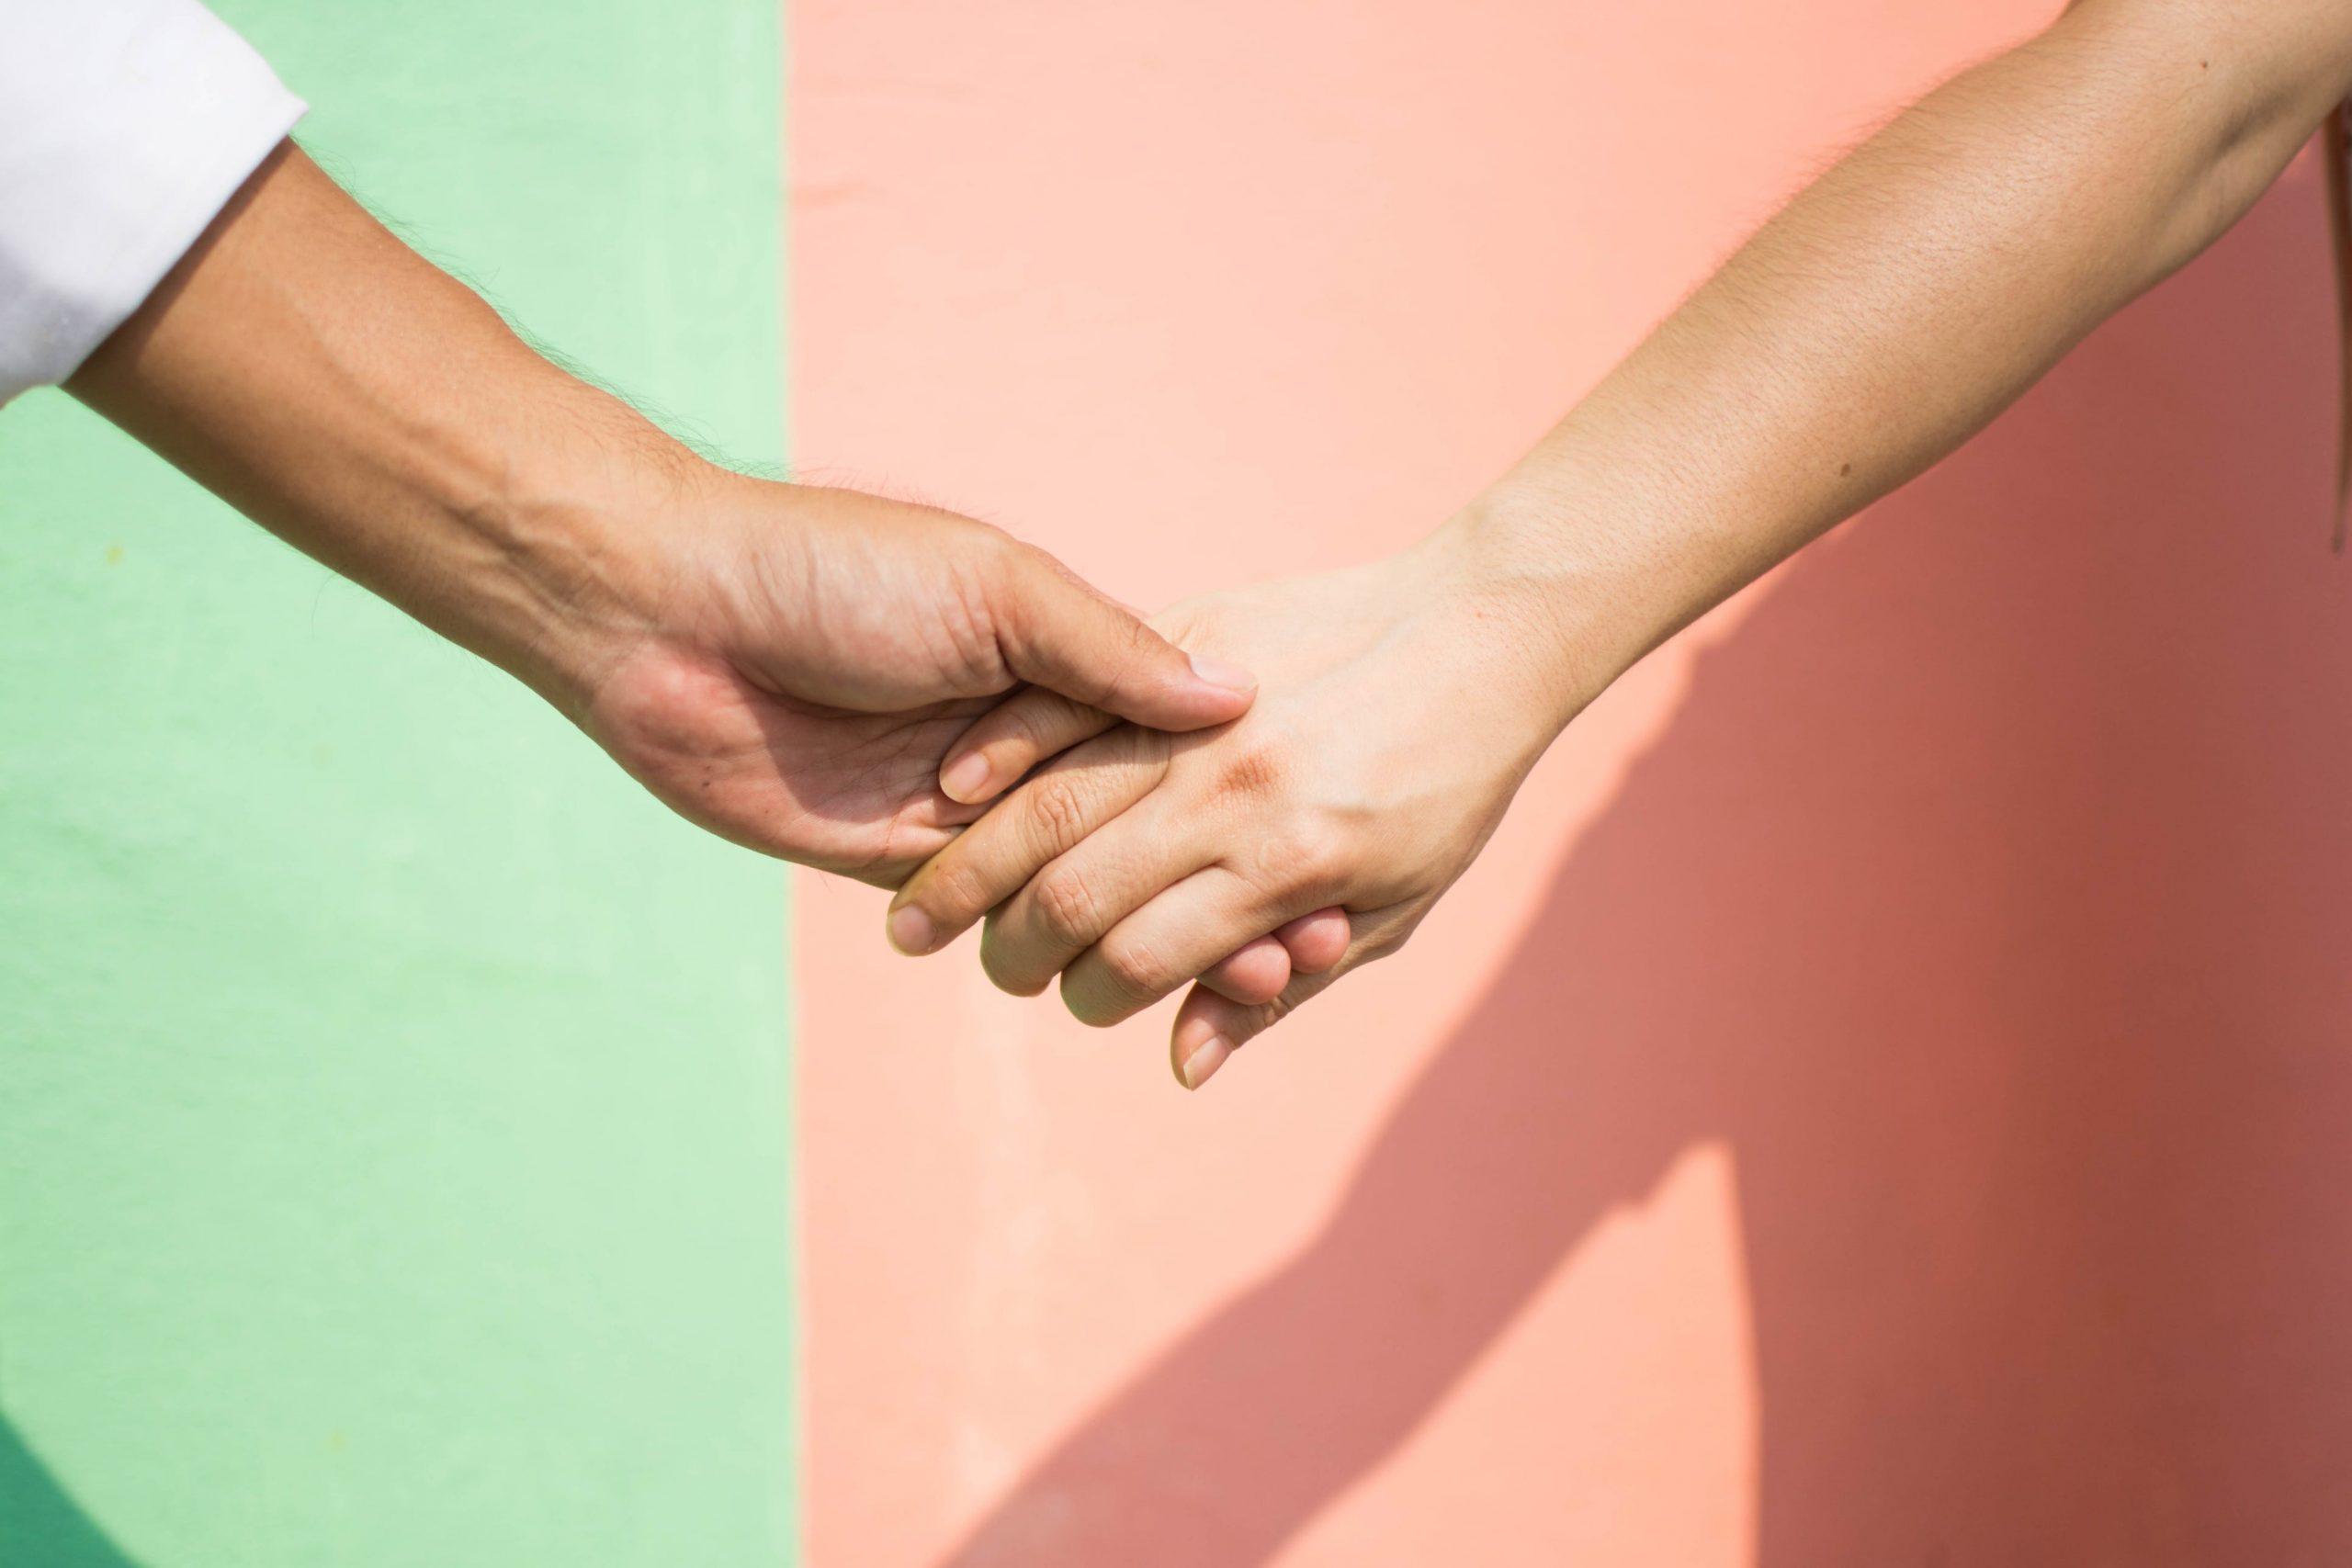 #LoveEquals: We’re Asking the World What Love Means